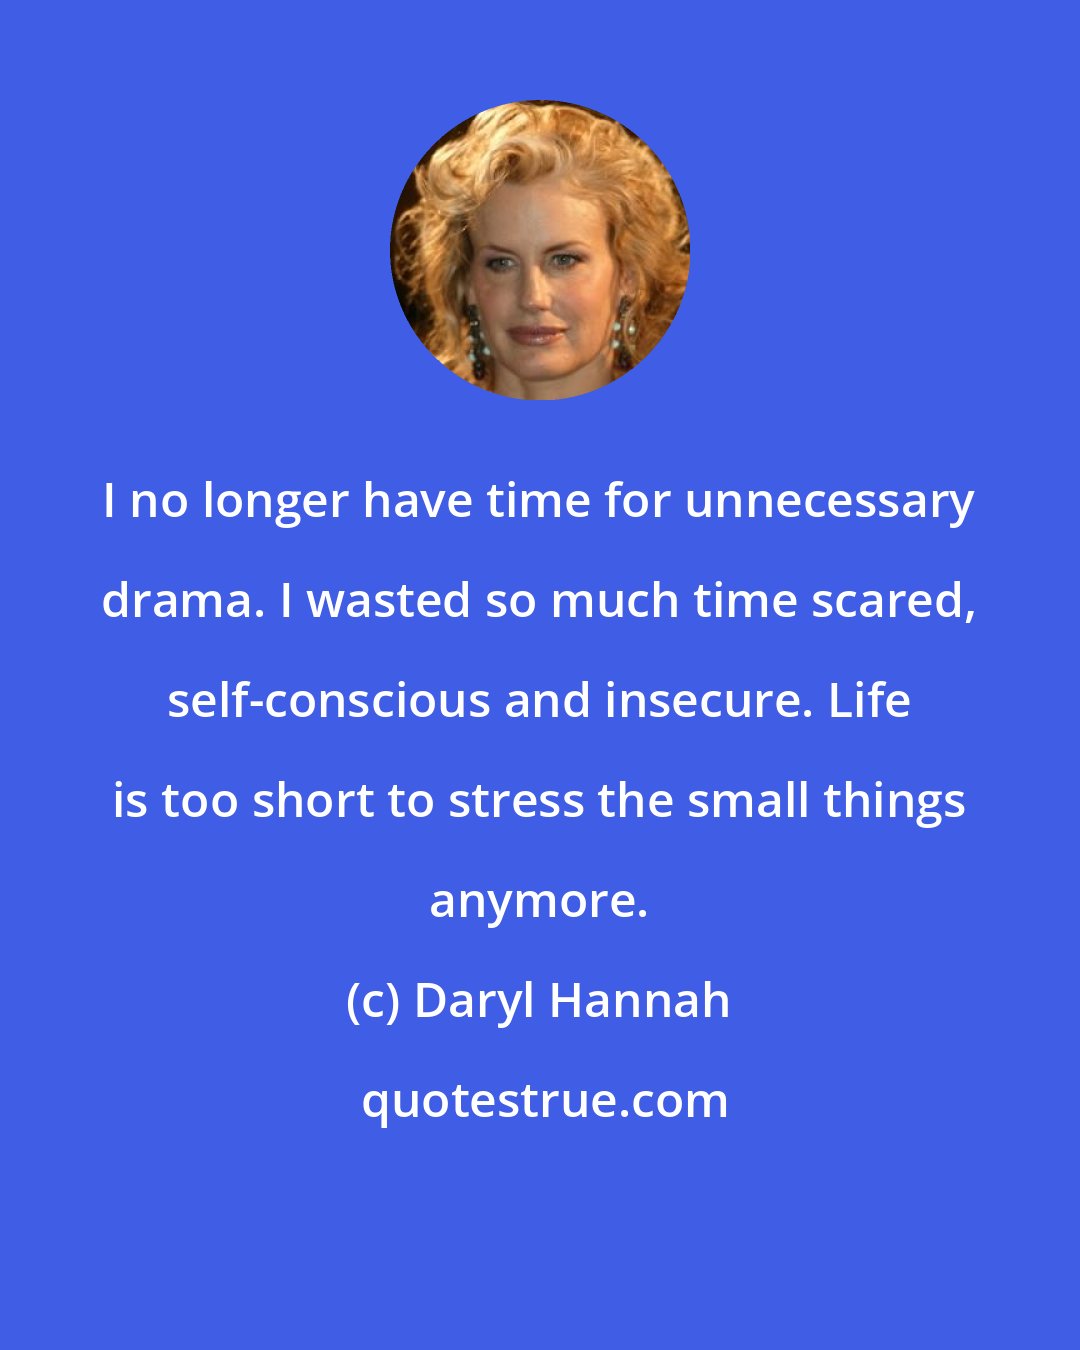 Daryl Hannah: I no longer have time for unnecessary drama. I wasted so much time scared, self-conscious and insecure. Life is too short to stress the small things anymore.